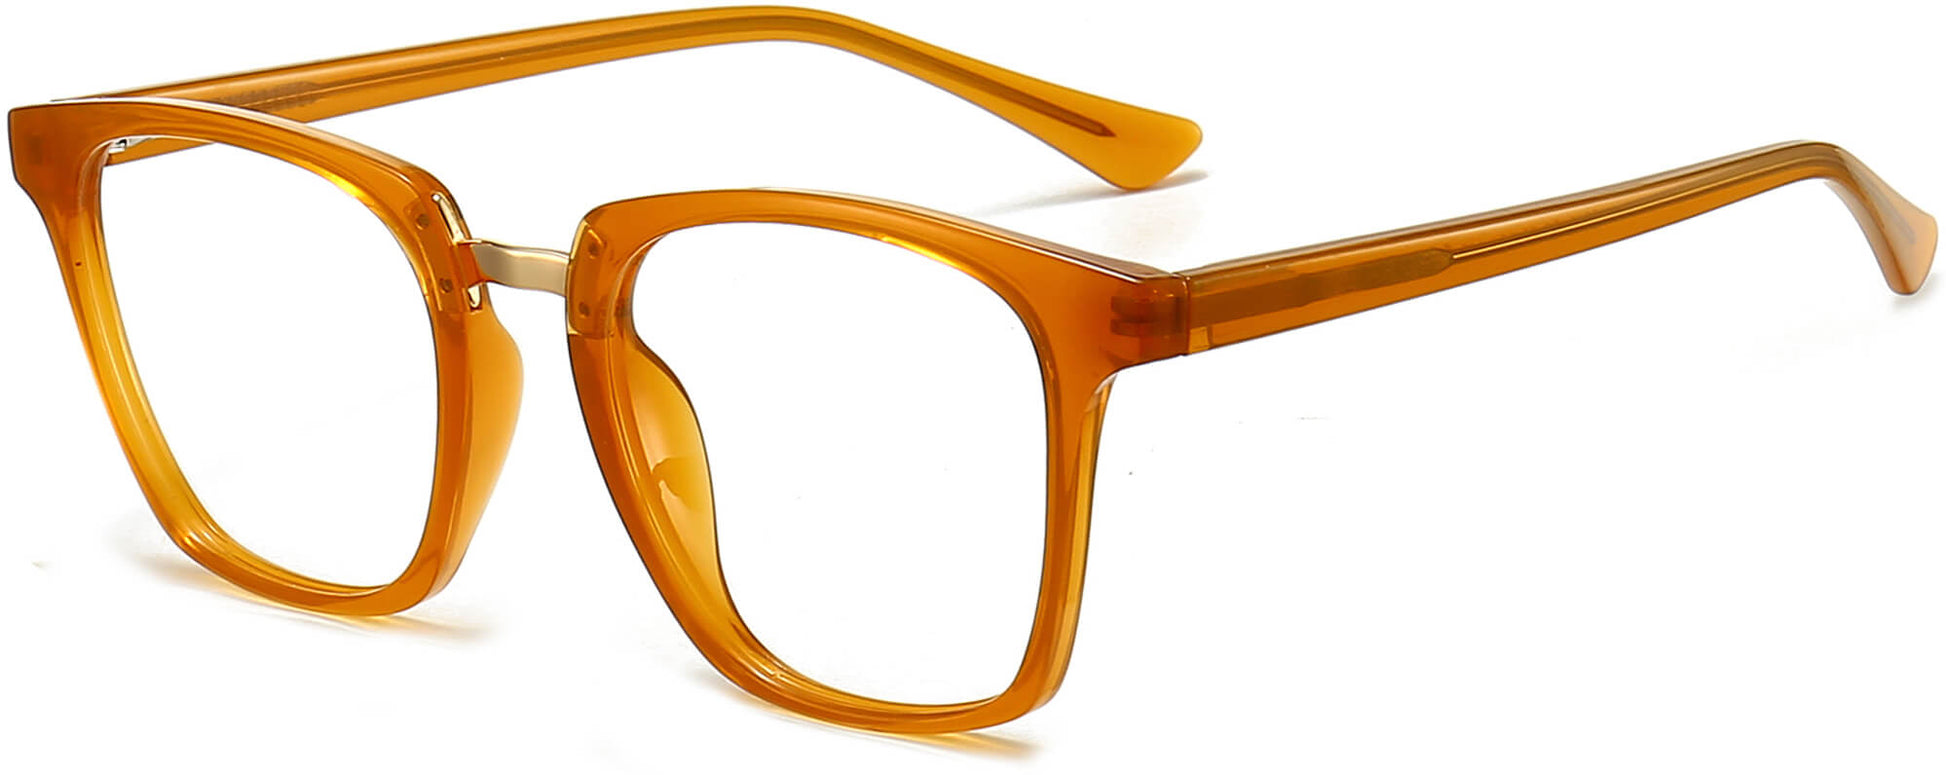 Teagan Square Yellow Eyeglasses from ANRRI, angle view